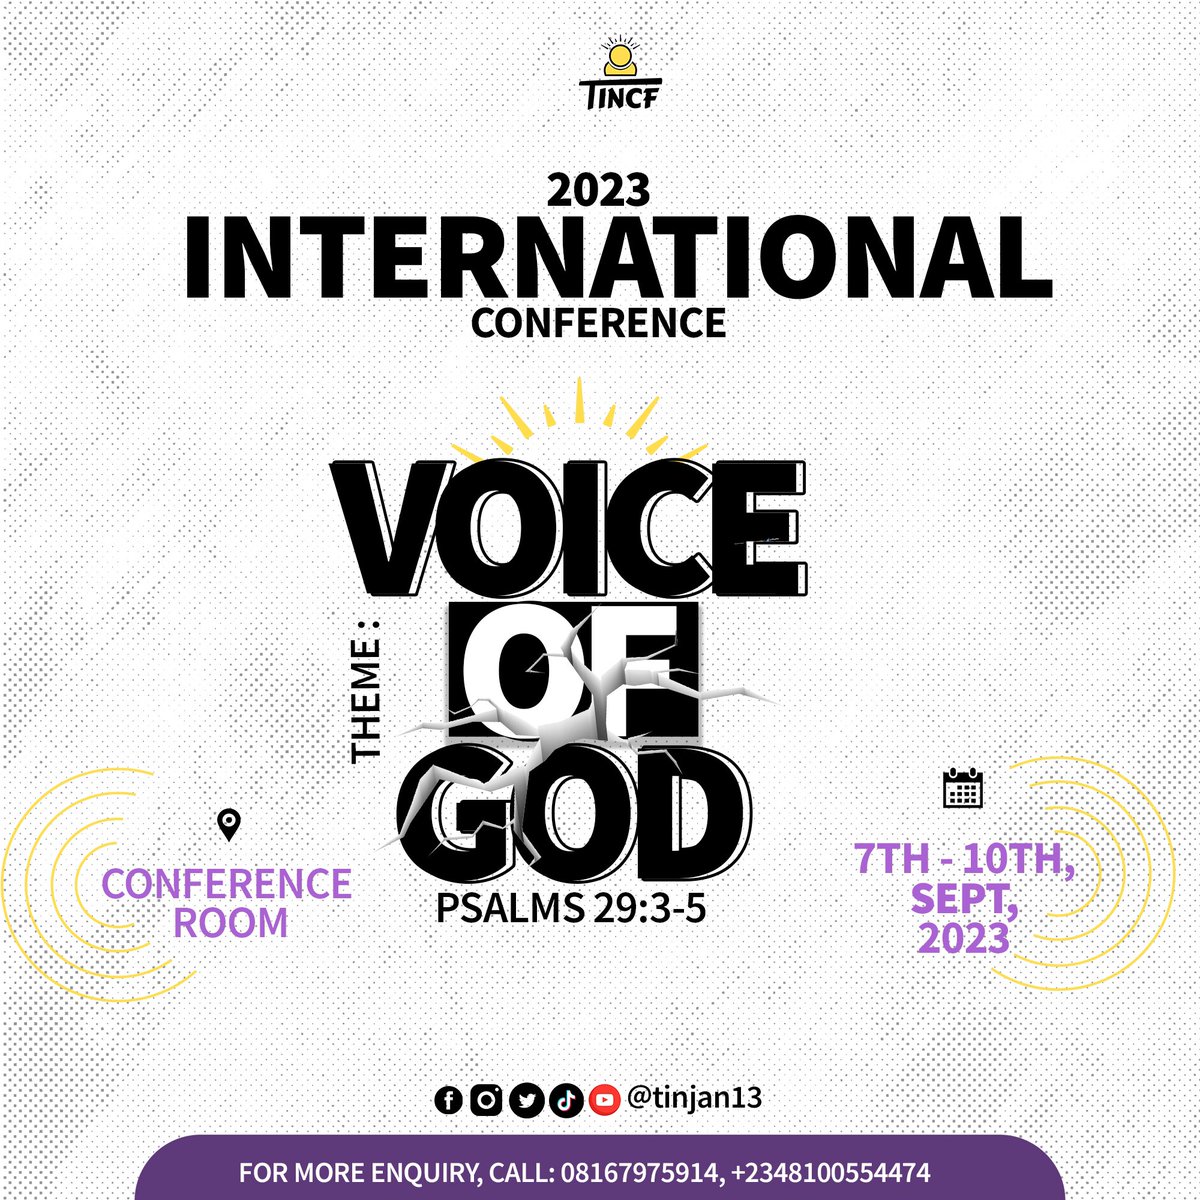 Come & experience the Divine Voice of God at our 2nd International Conference- “The Voice of God”- Psalm 29:3-5. 

Date: 7-10th of Sept, 2023

Join us by registering through the link below: 
bit.ly/TINCFCONFERENC…

Pray, Plan and Prepare to Attend! 
Don't miss out!
#IC2023